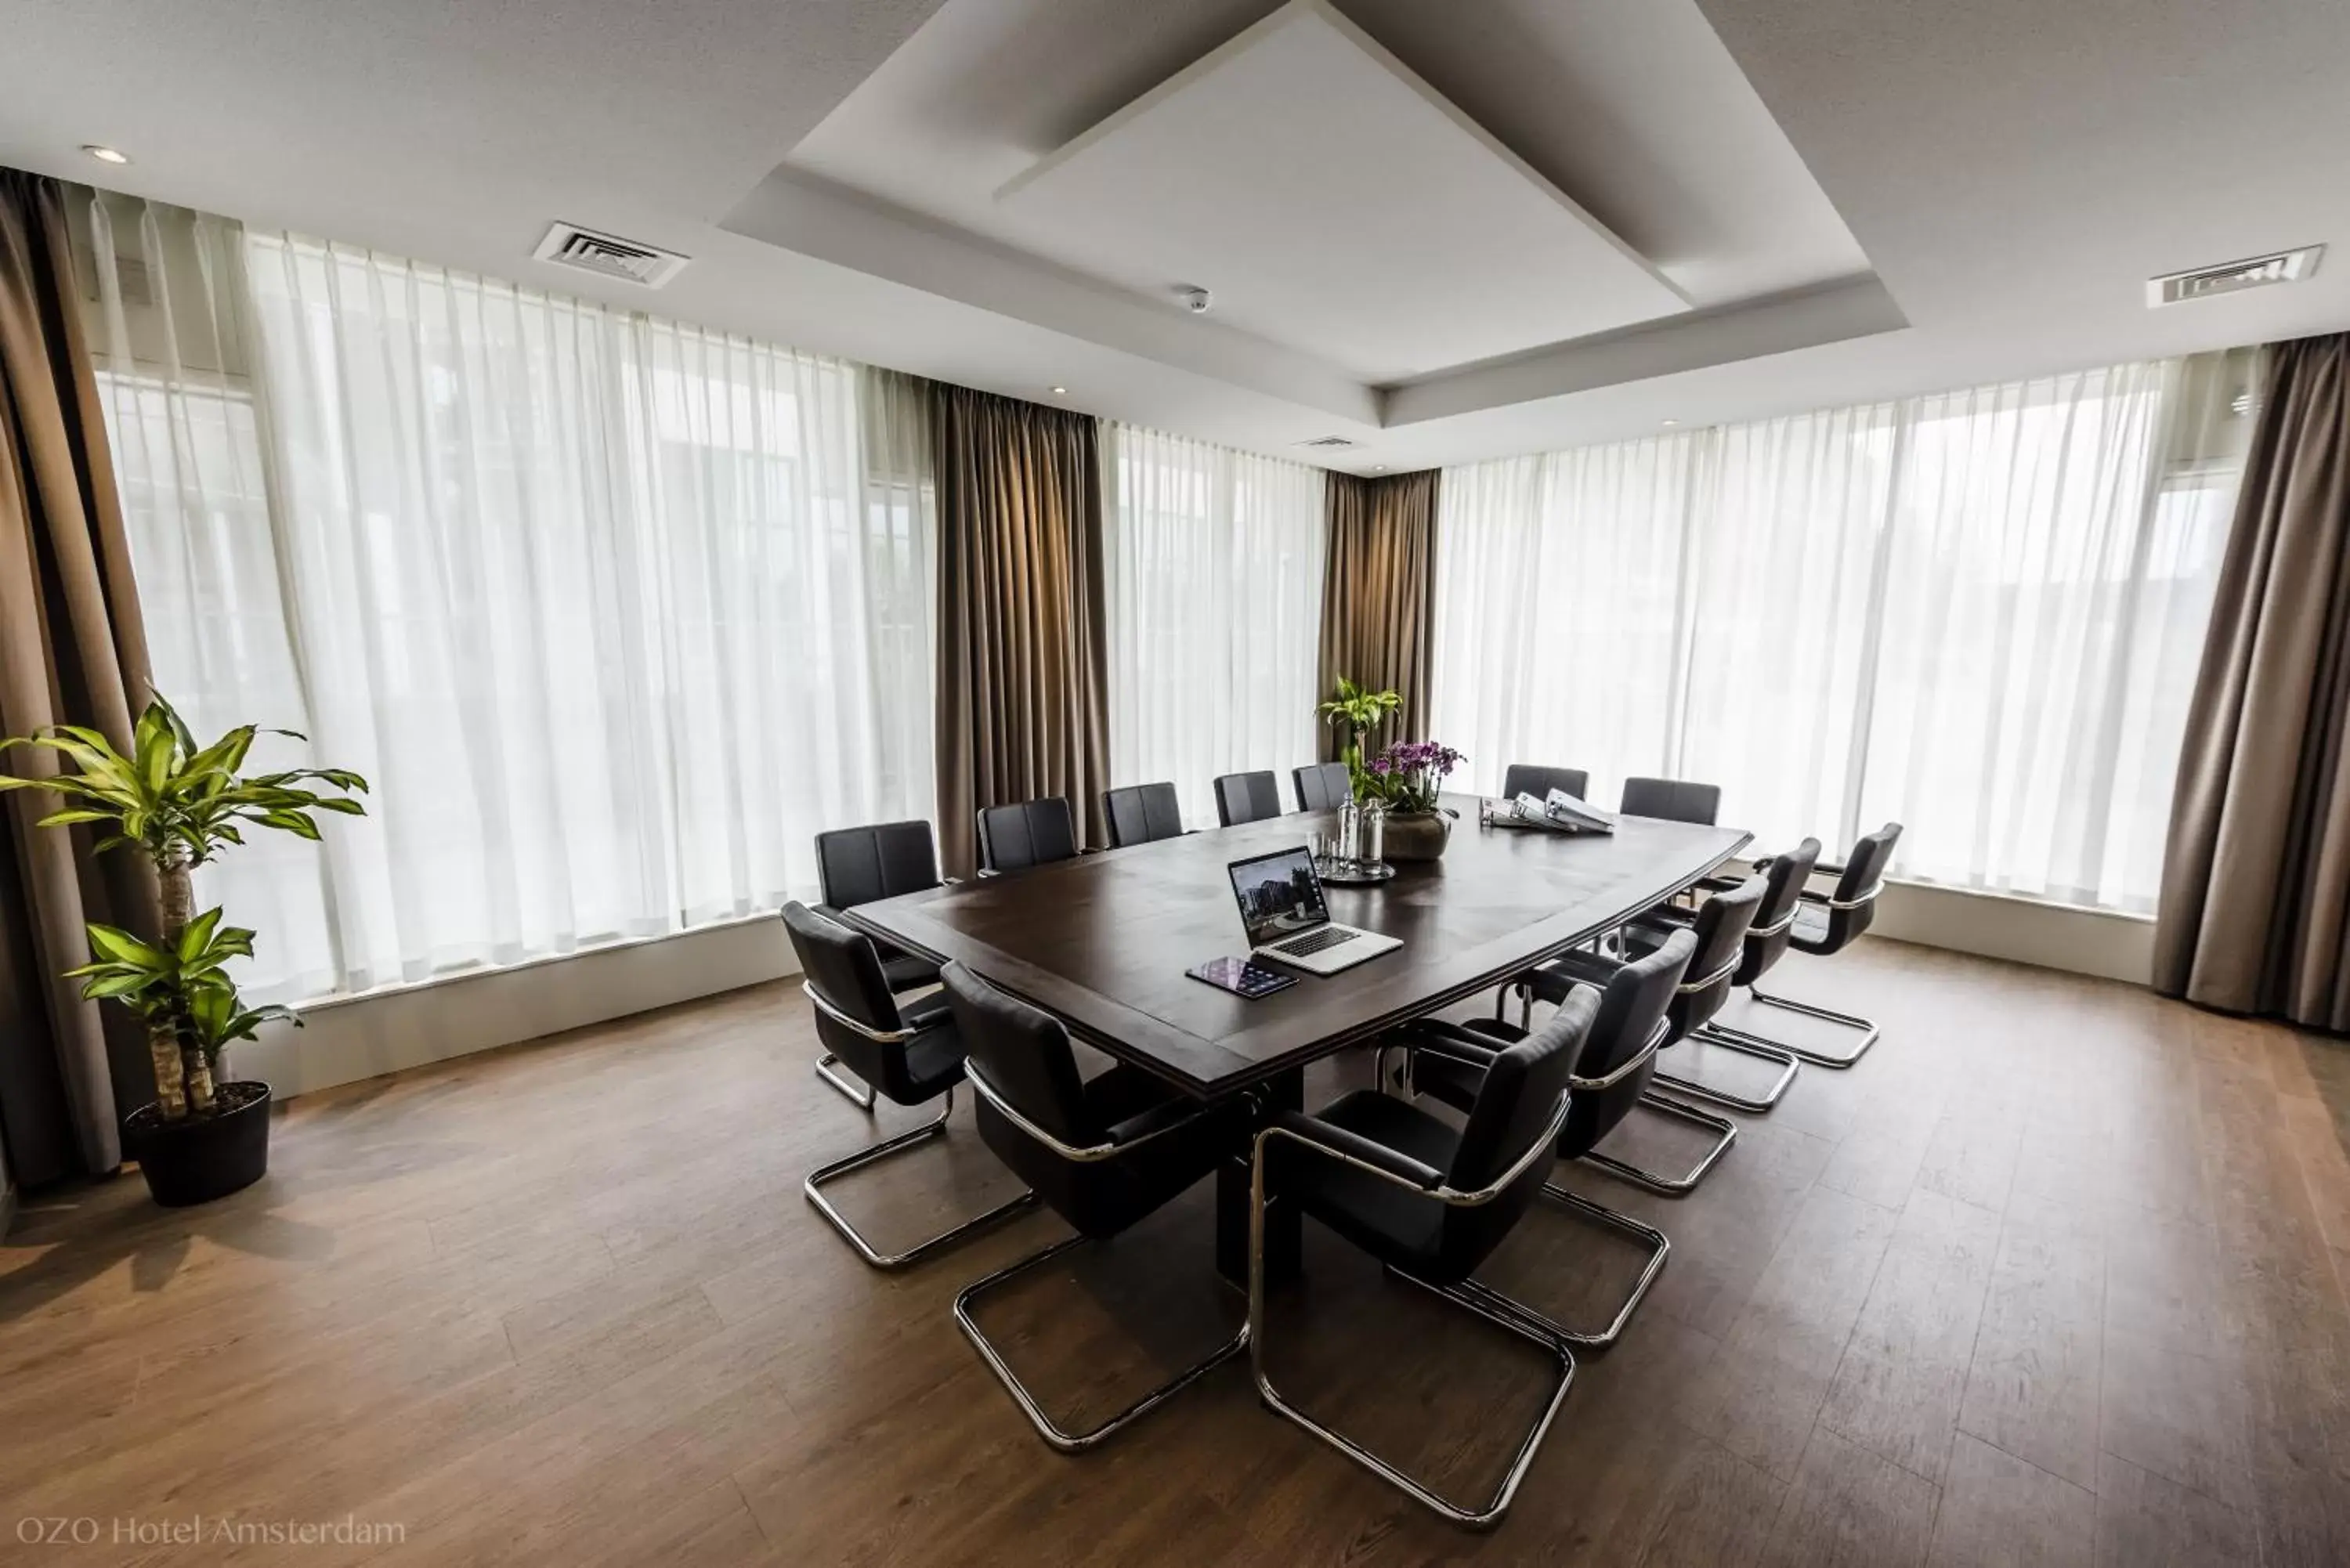 Business facilities in OZO Hotels Arena Amsterdam